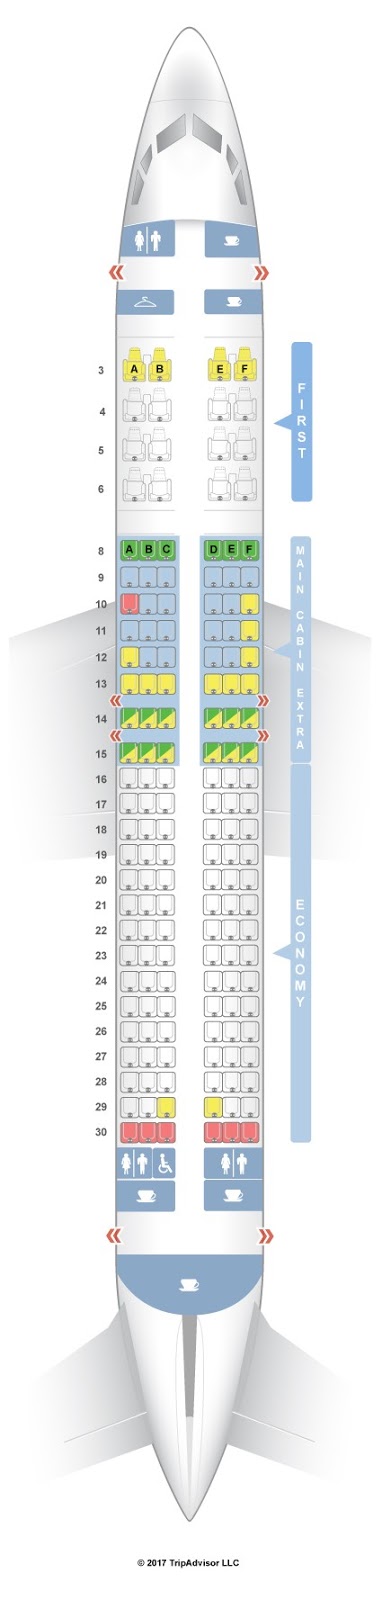 Lovely American Airlines 737-800 Seat Map